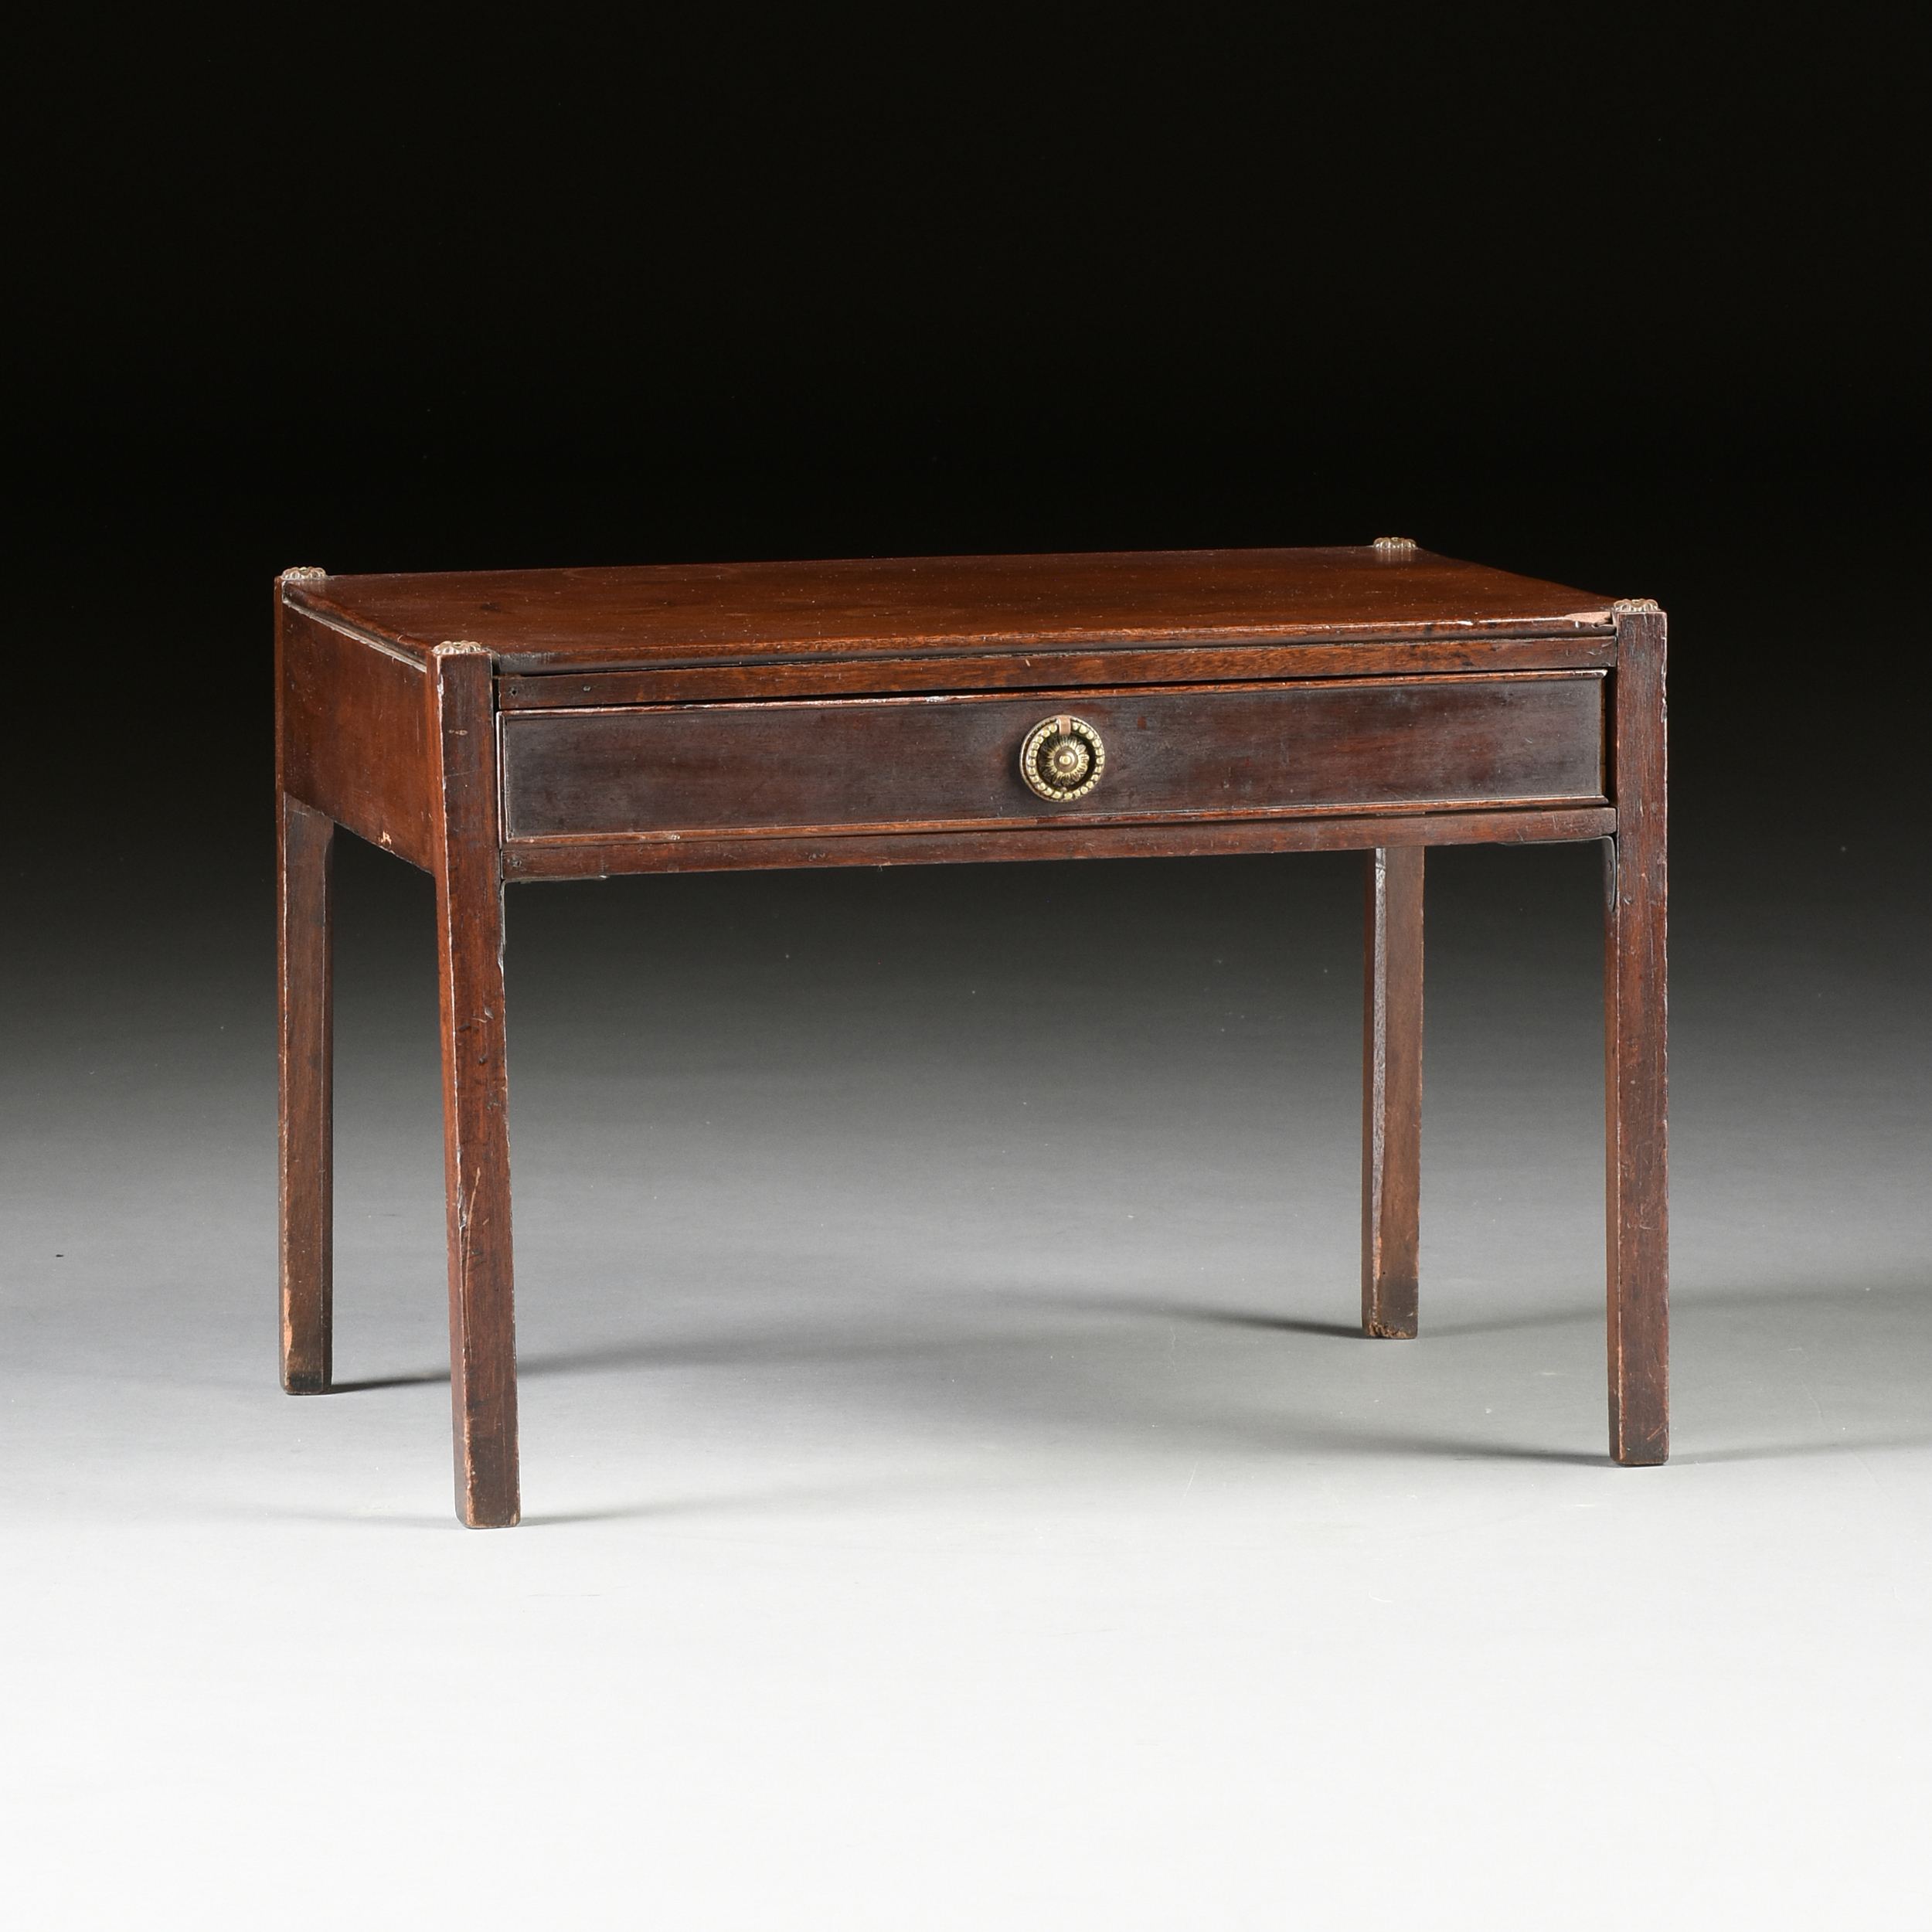 A GEORGE III MAHOGANY LOW SIDE TABLE, LATE 18TH/EARLY 19TH CENTURY, the rectangular top above a - Image 3 of 6